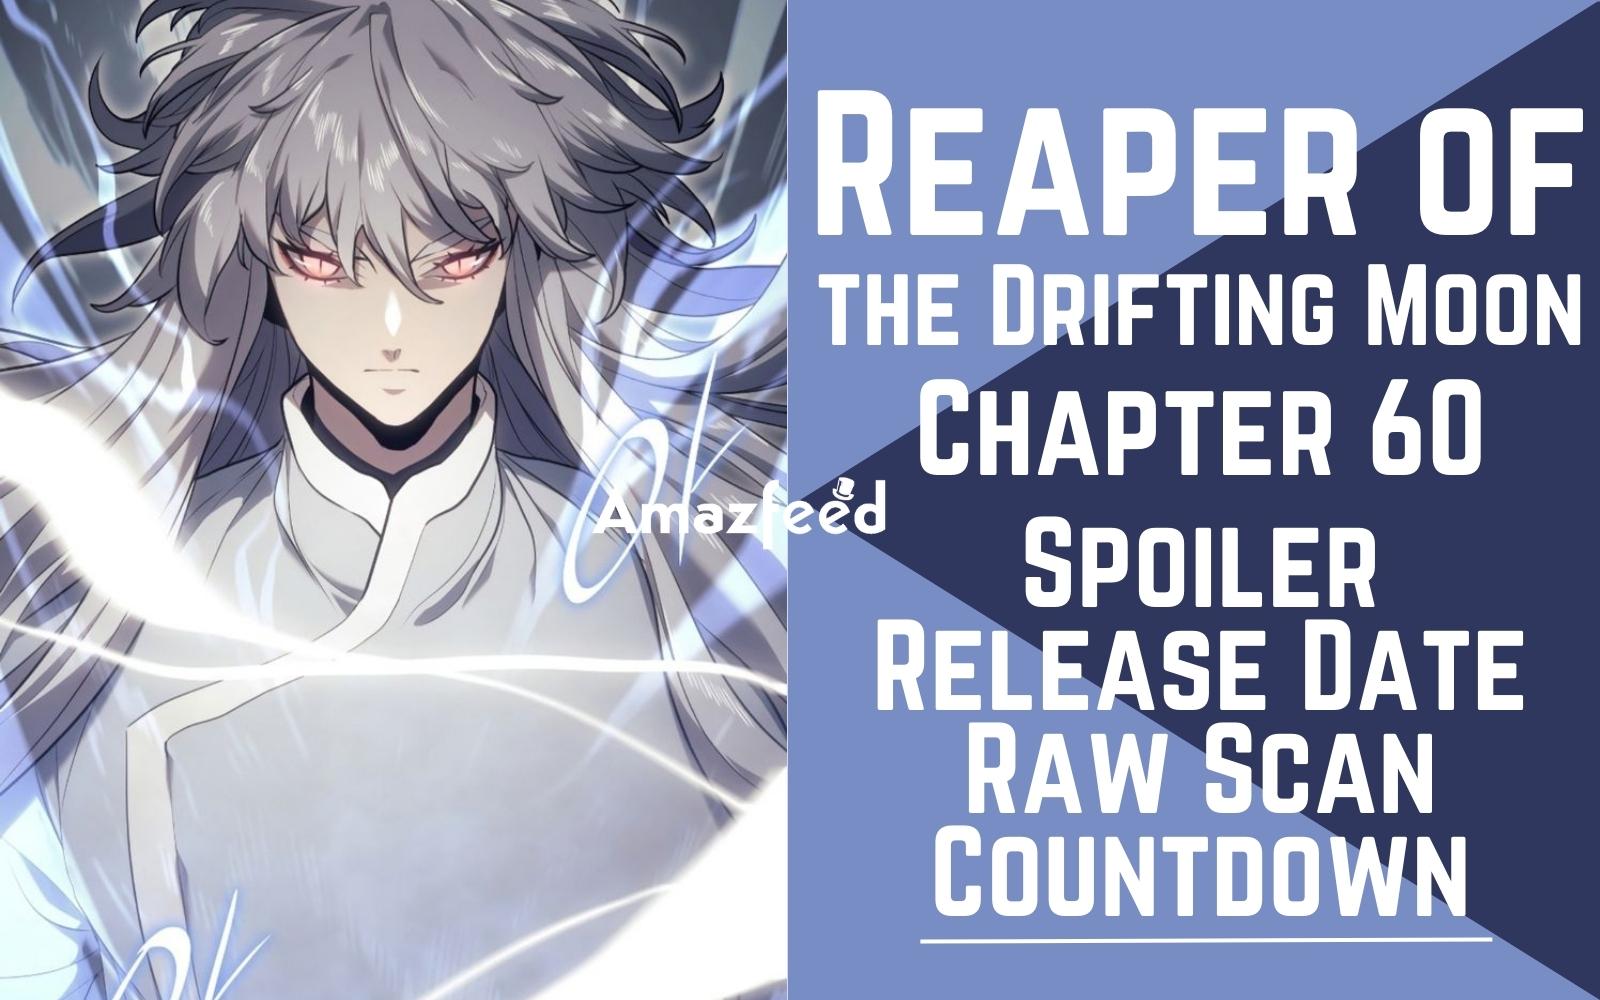 Just why is this happening with reaper and not other scanlation sites? :  r/manhwa